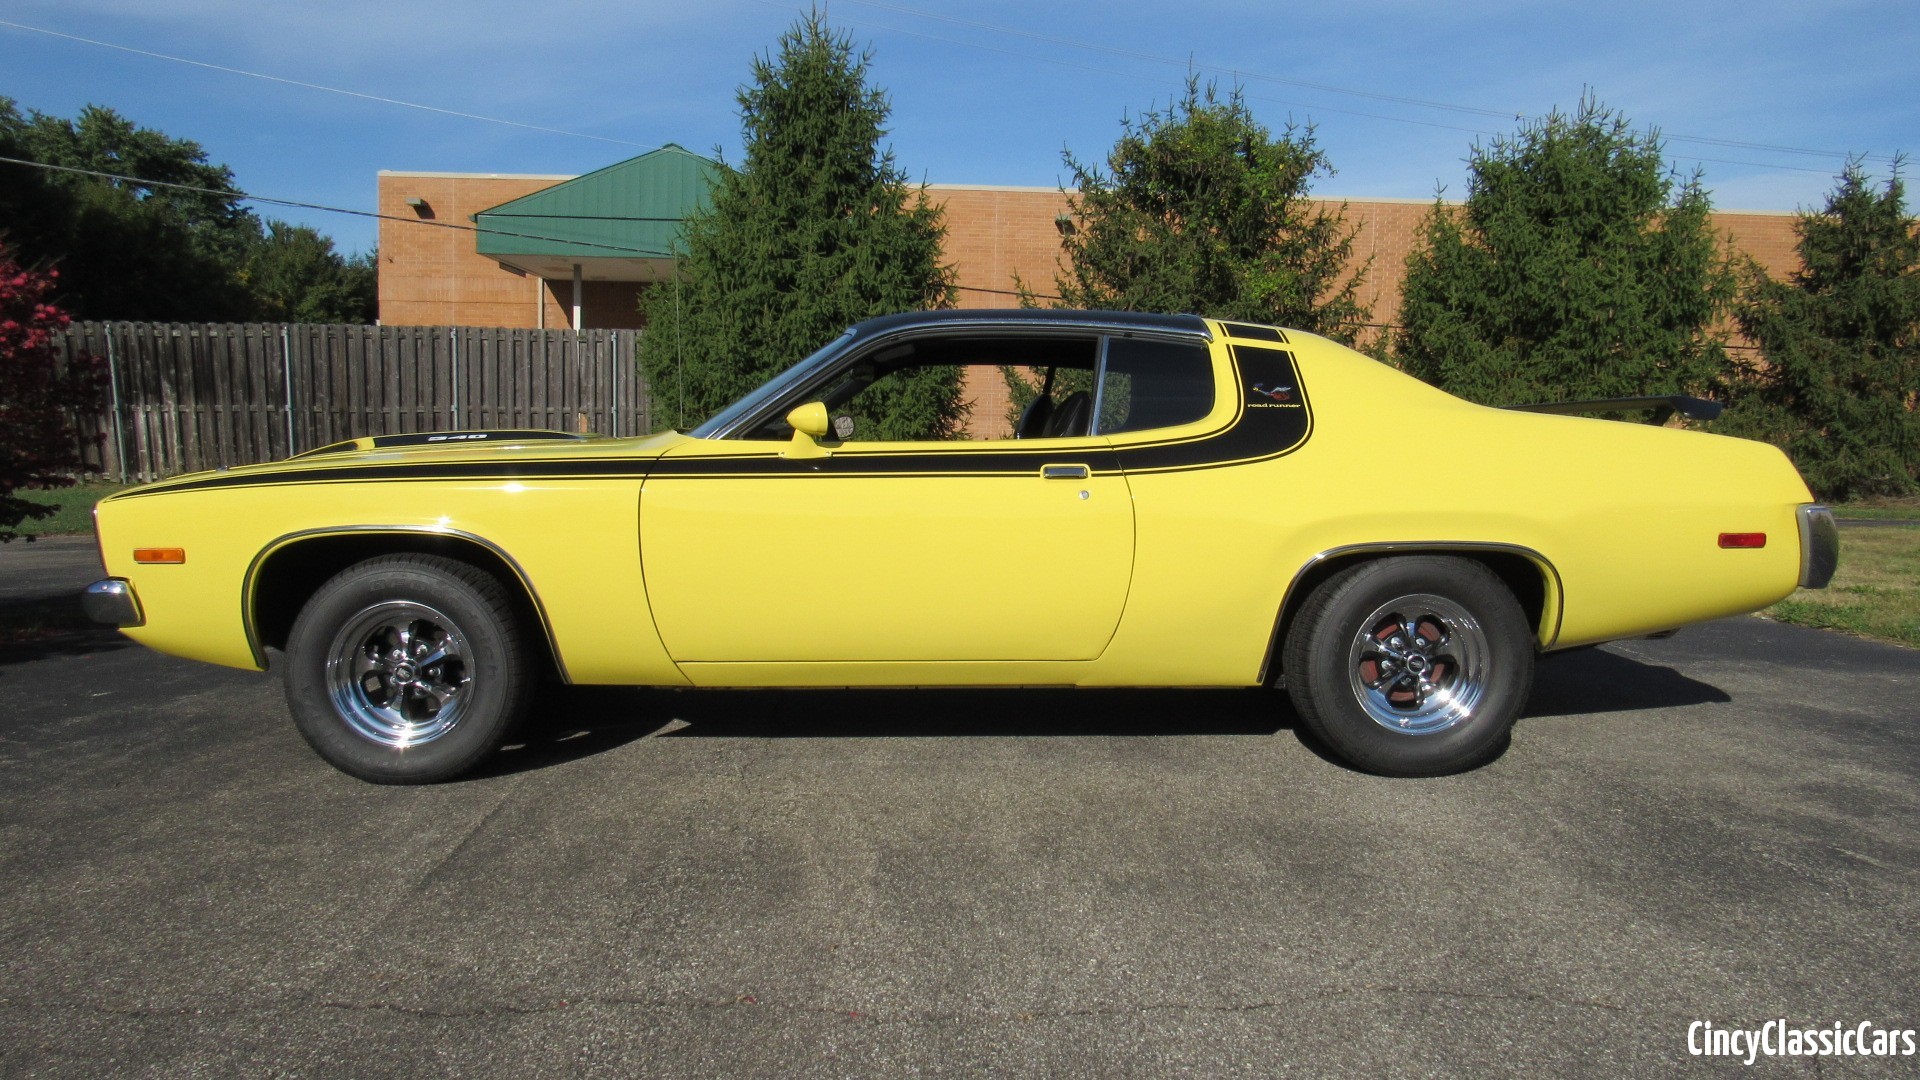 1973 Plymouth Road Runner, 340 Auto, 88K Miles, Sold! Cincy Classic Cars photo